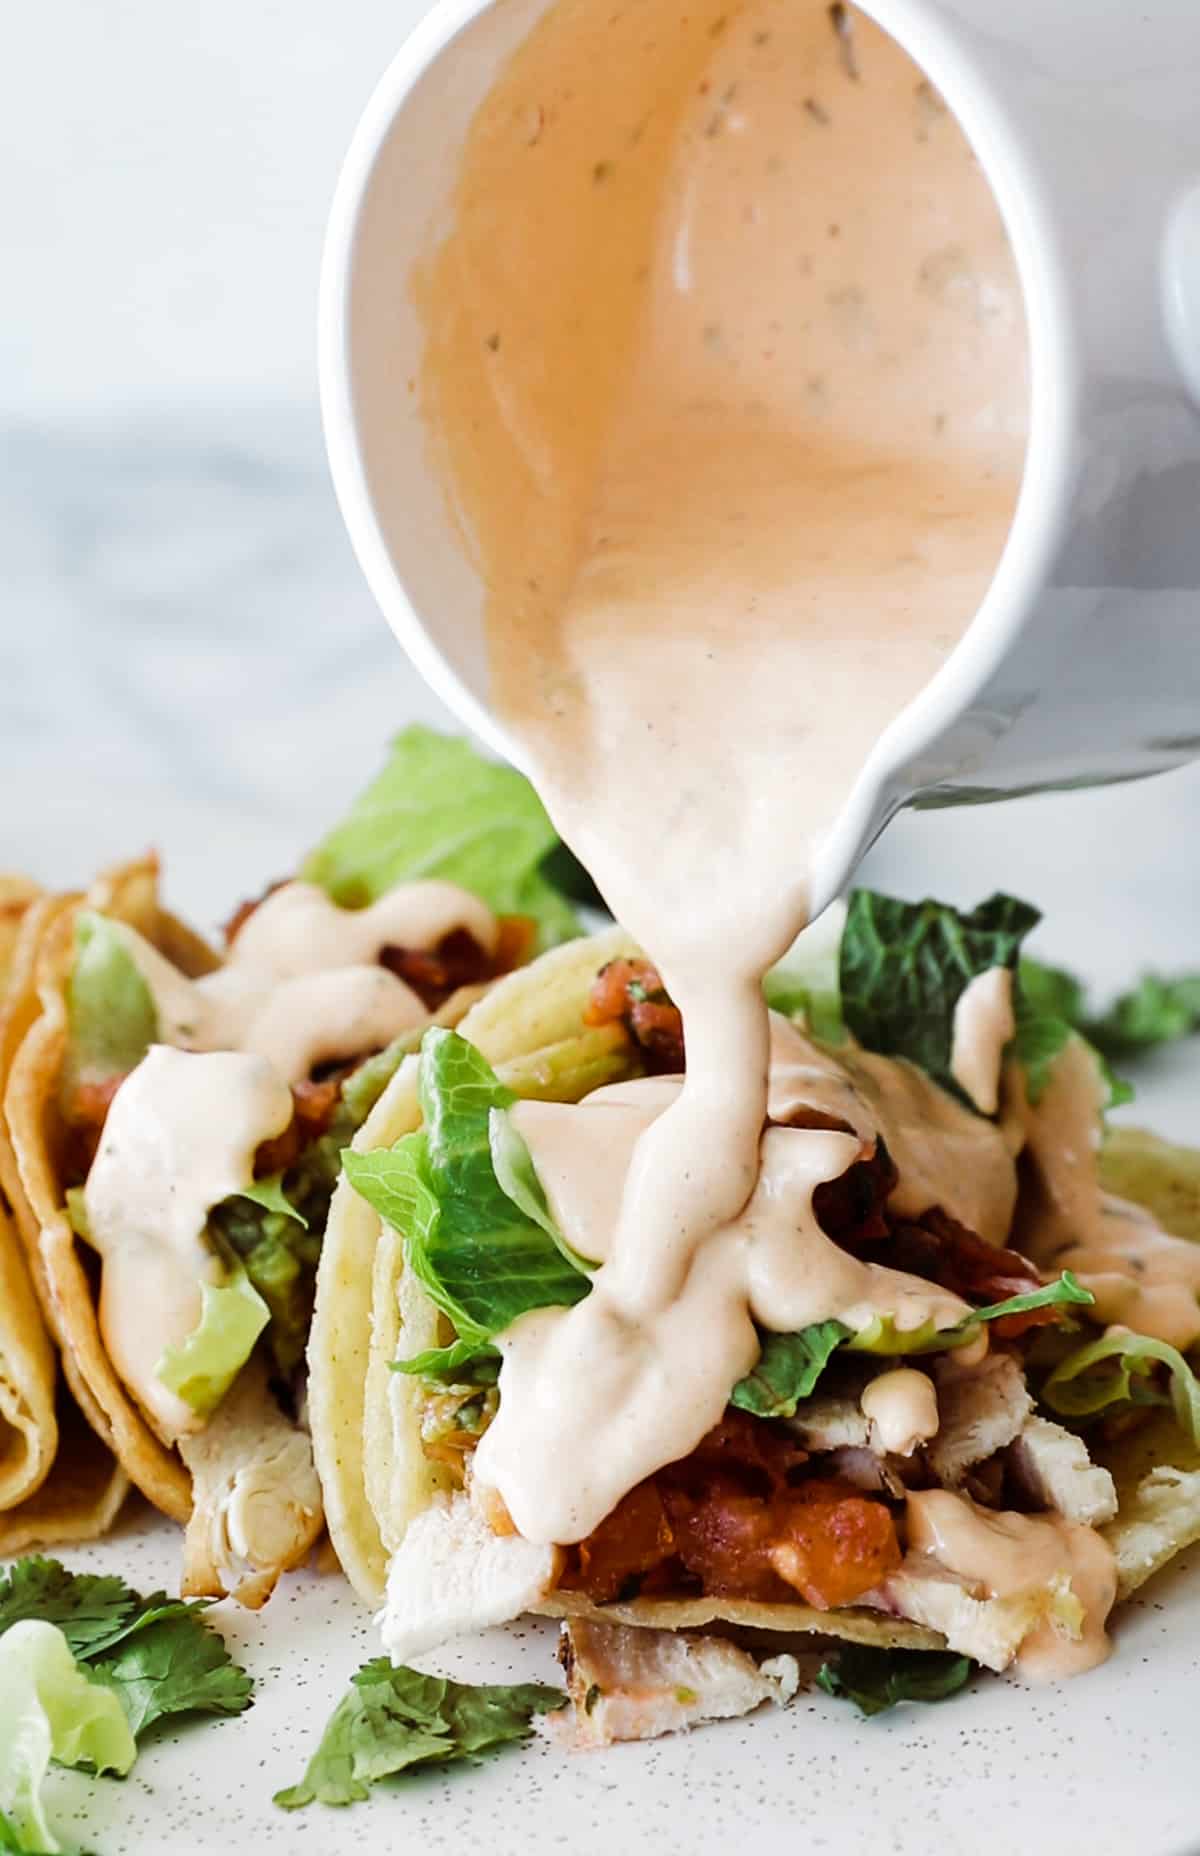 Jar pouring creamy chipotle sauce over a chicken taco